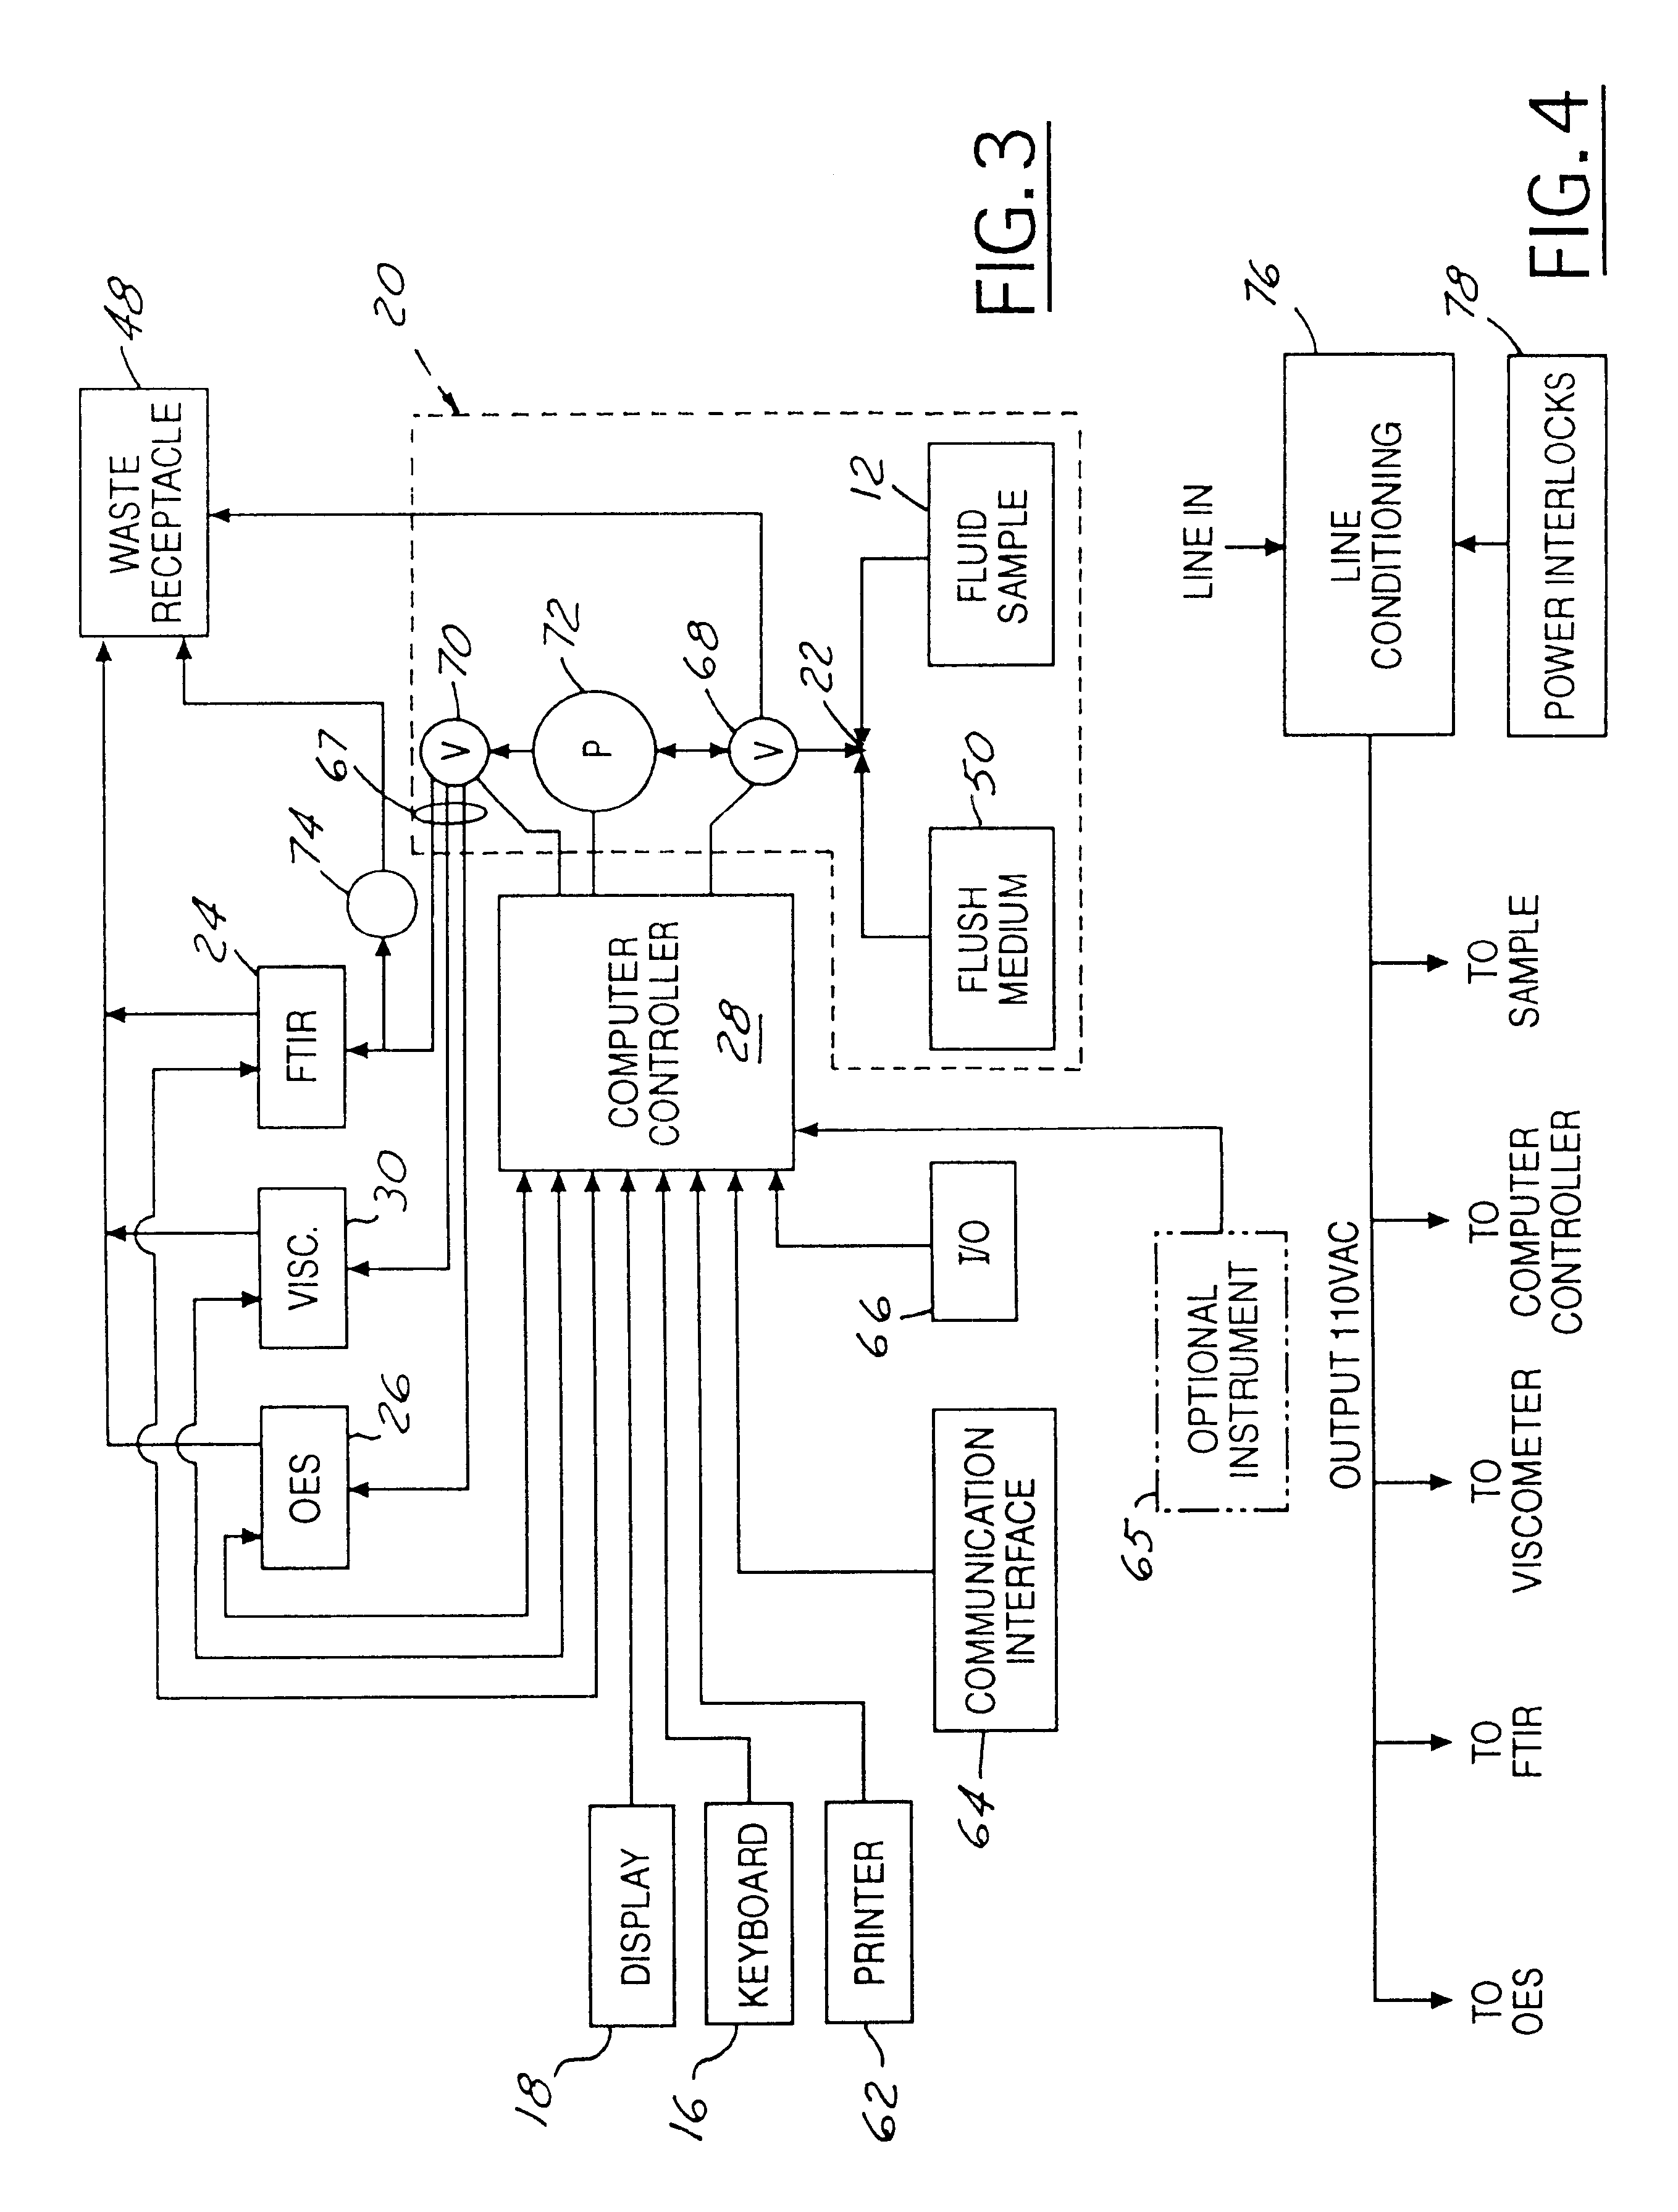 On-site analyzer having spark emission spectrometer with even-wearing electrodes